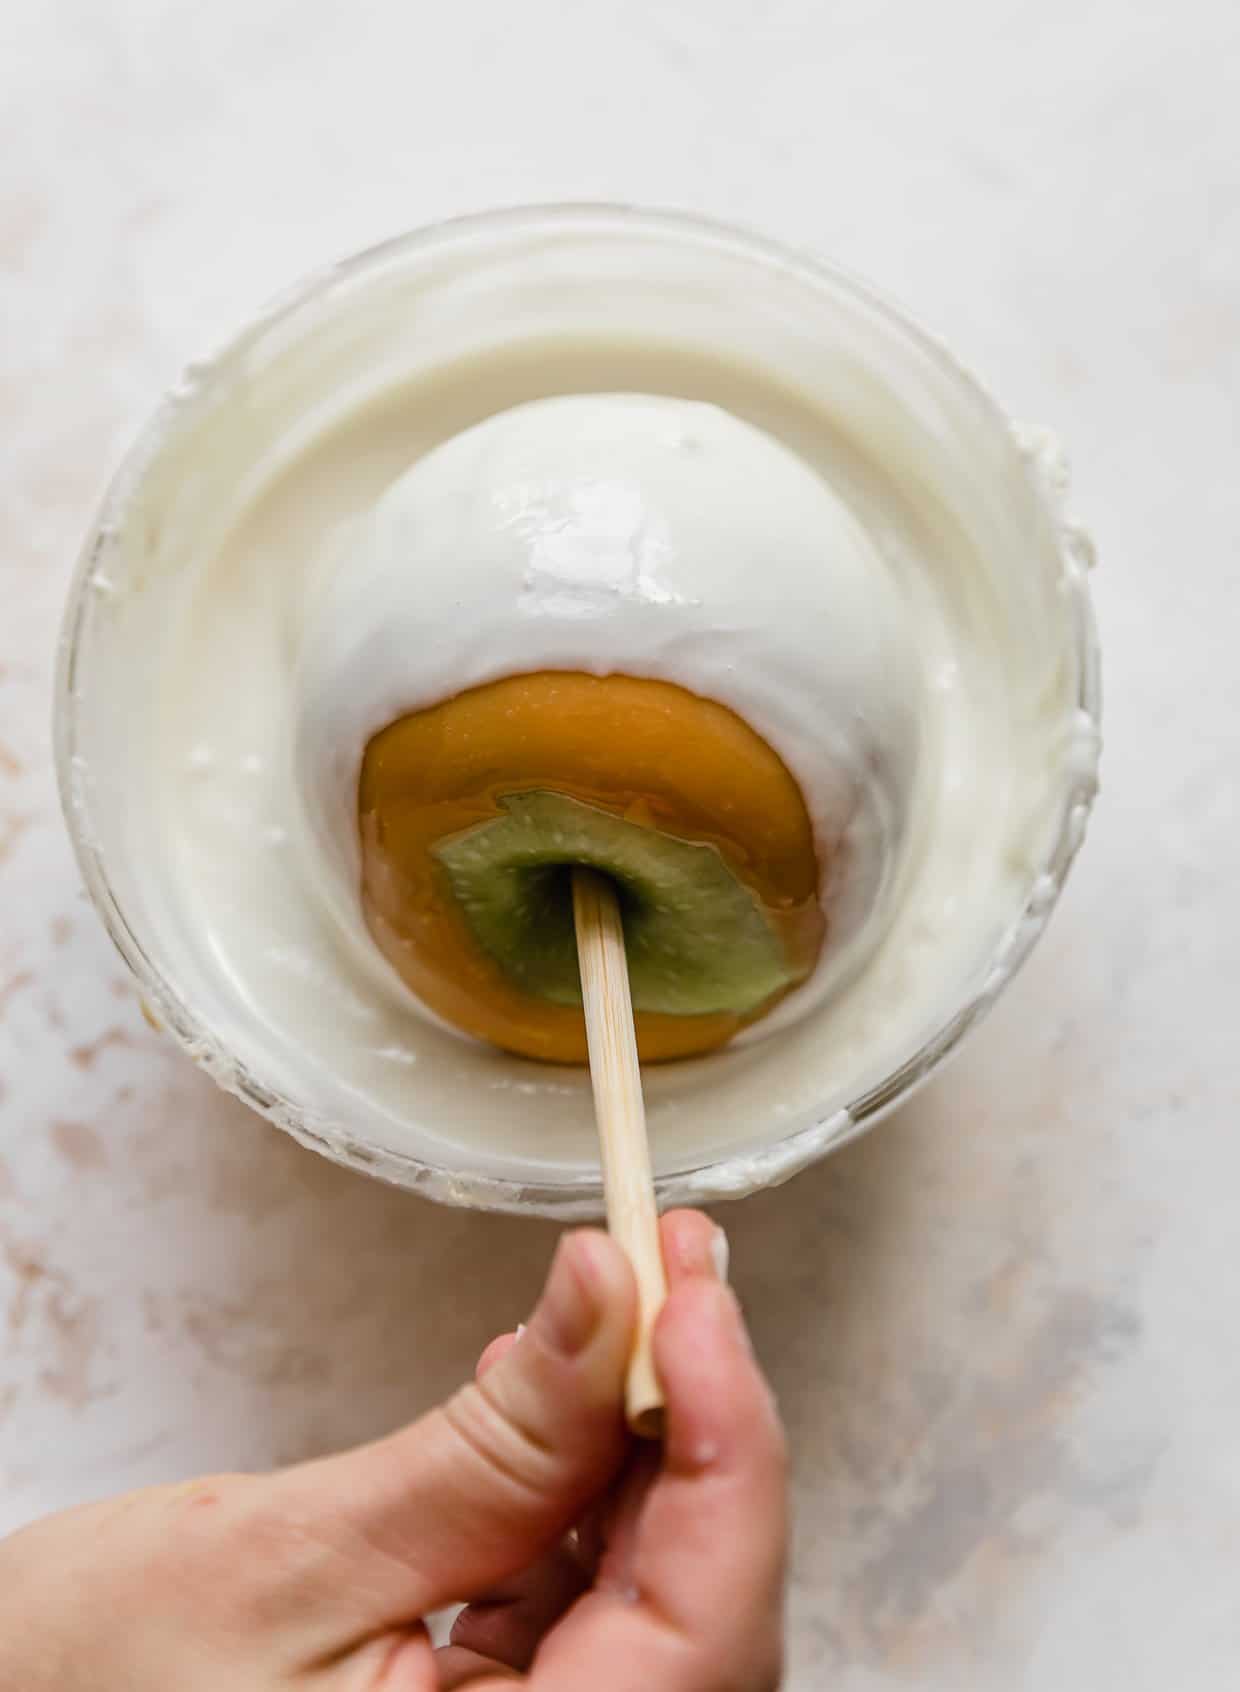 A caramel coated apple being dipped in a bowl filled with melted almond bark (or white chocolate).